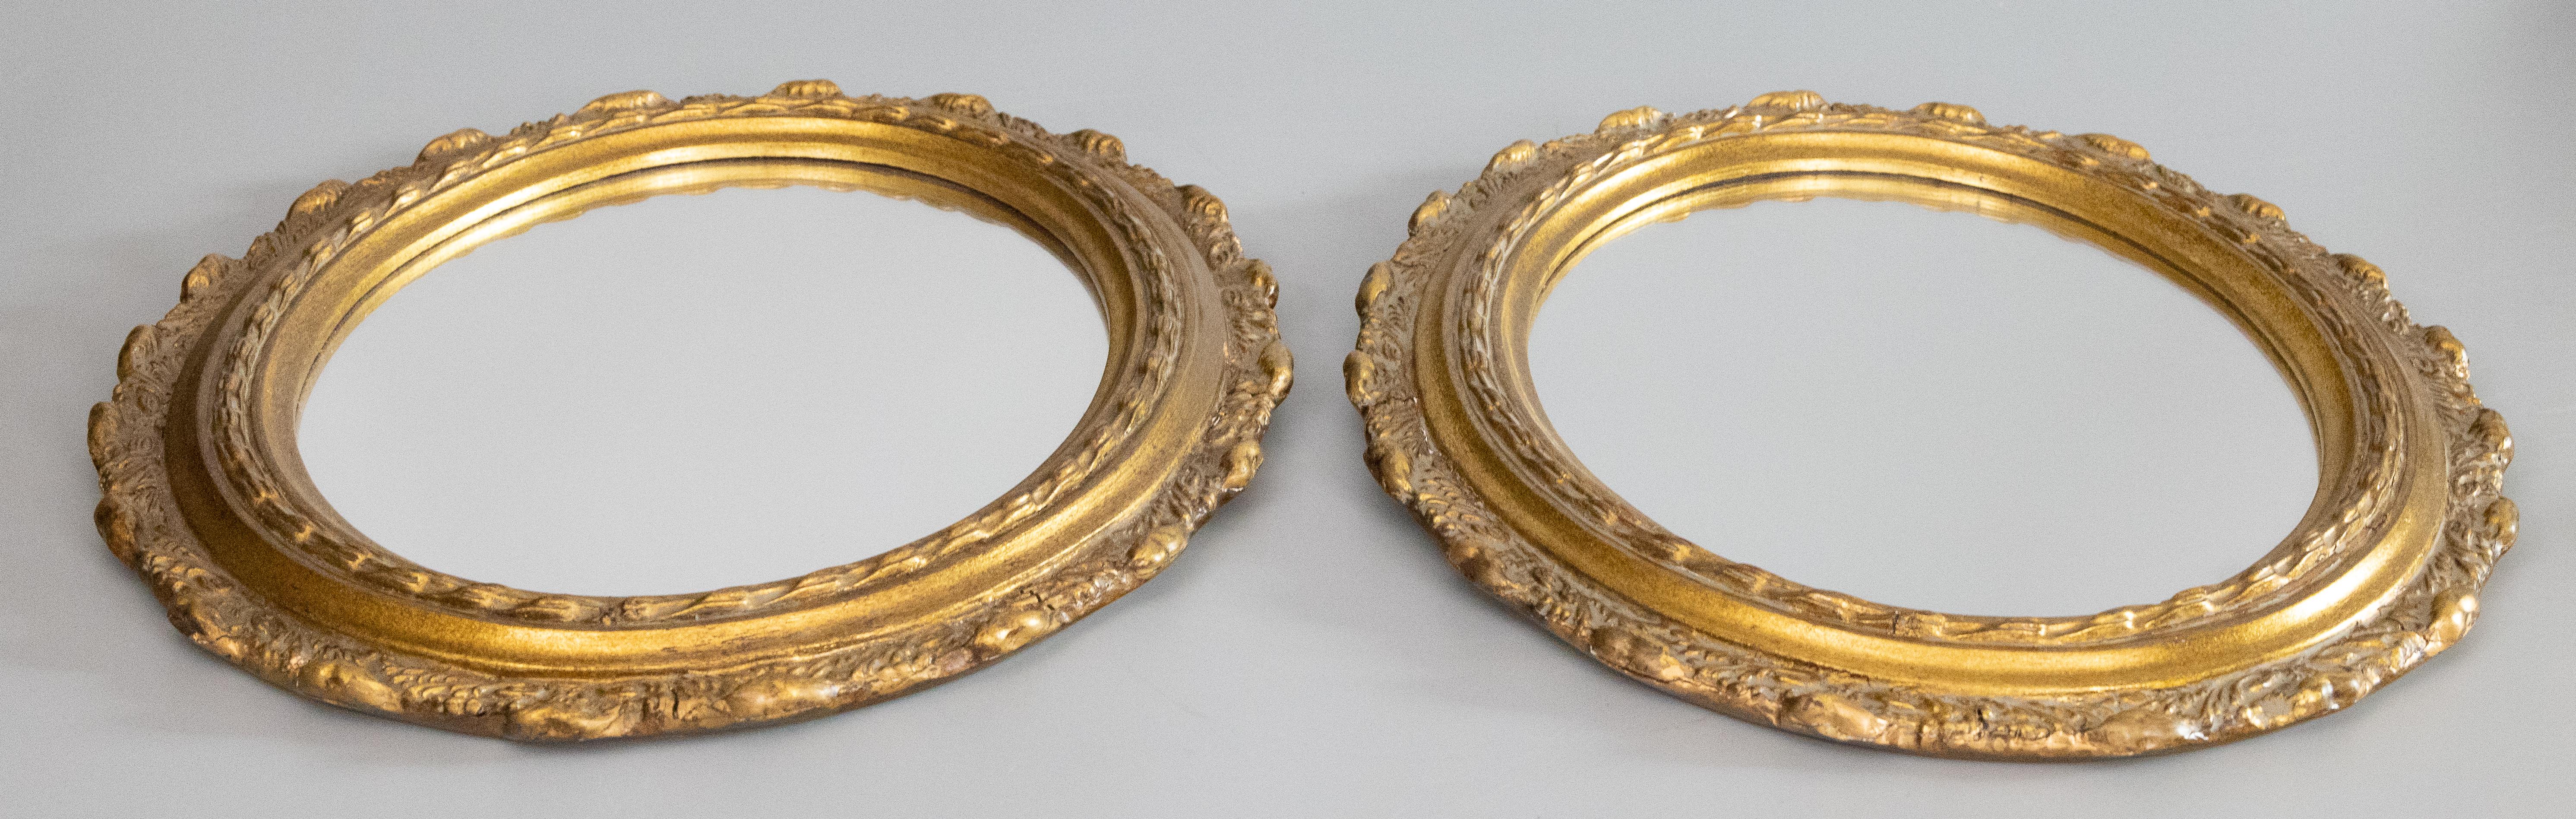 20th Century Pair of Mid-Century Italian Giltwood and Gesso Oval Mirrors, circa 1950 For Sale